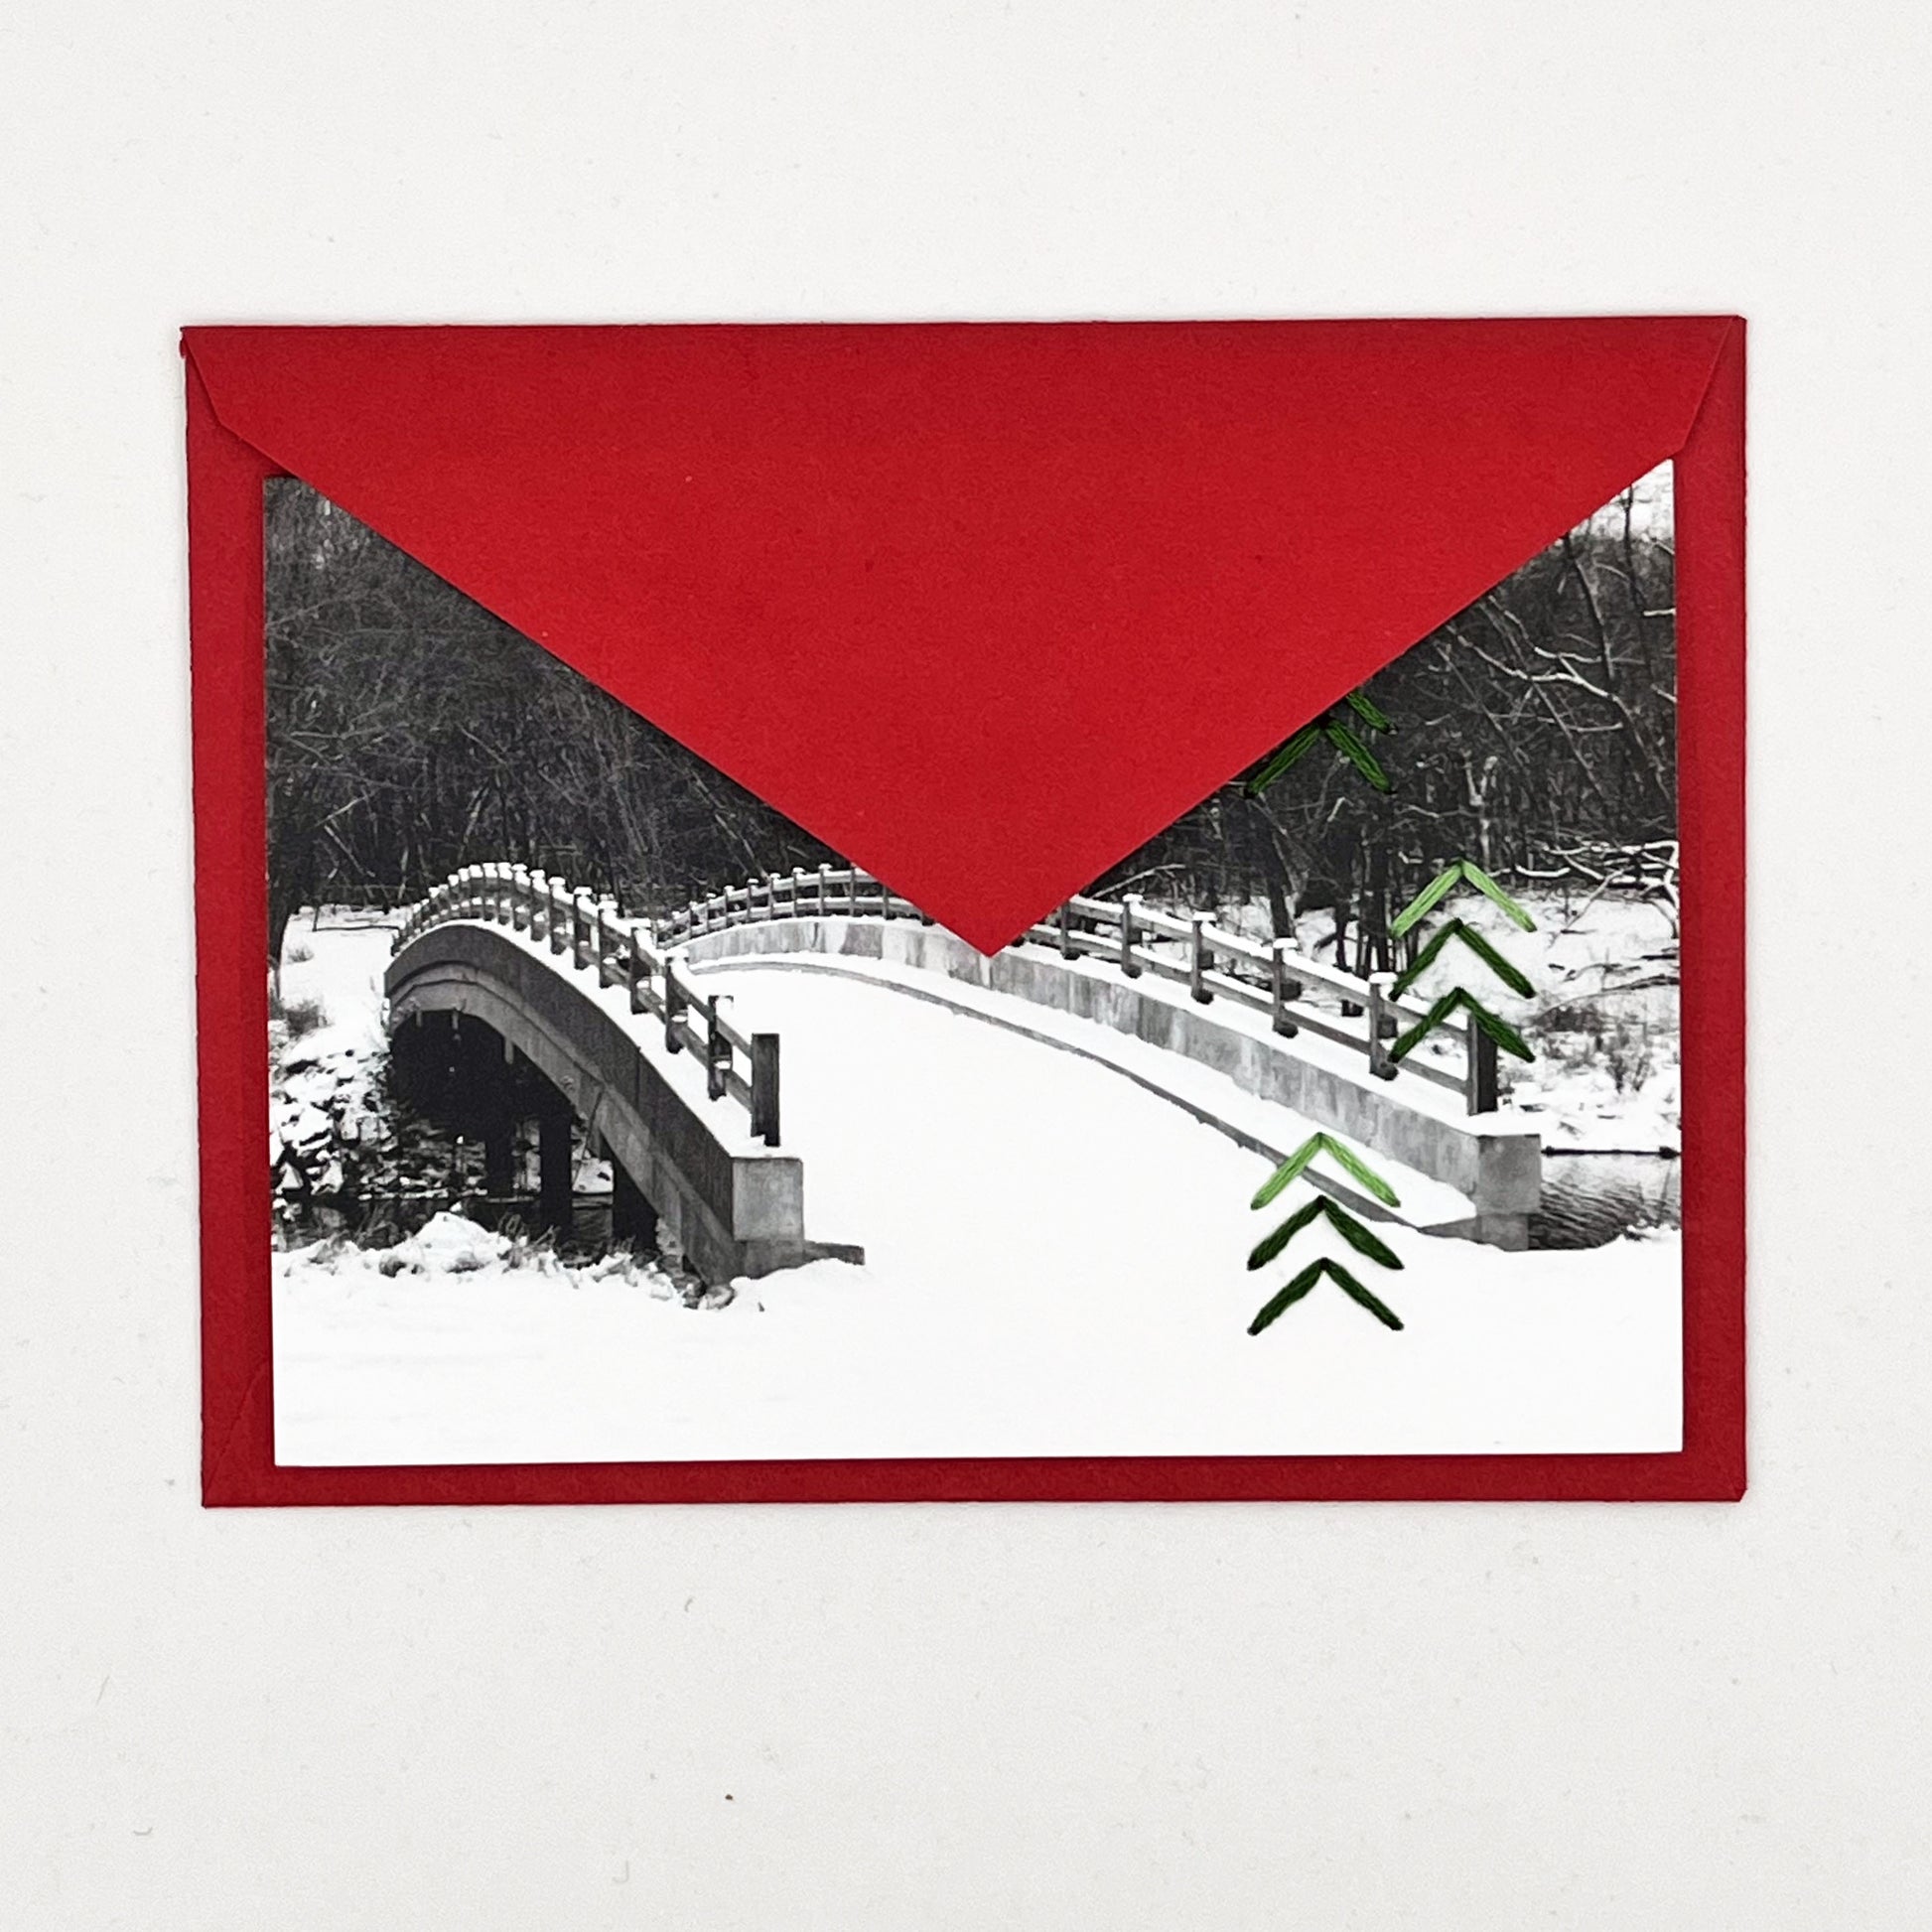 Greeting card flat on a red envelope, tucked under the flap. Photo of snow covered bridge. Green stitches of groups of 3 chevrons to create abstract pine tree shape